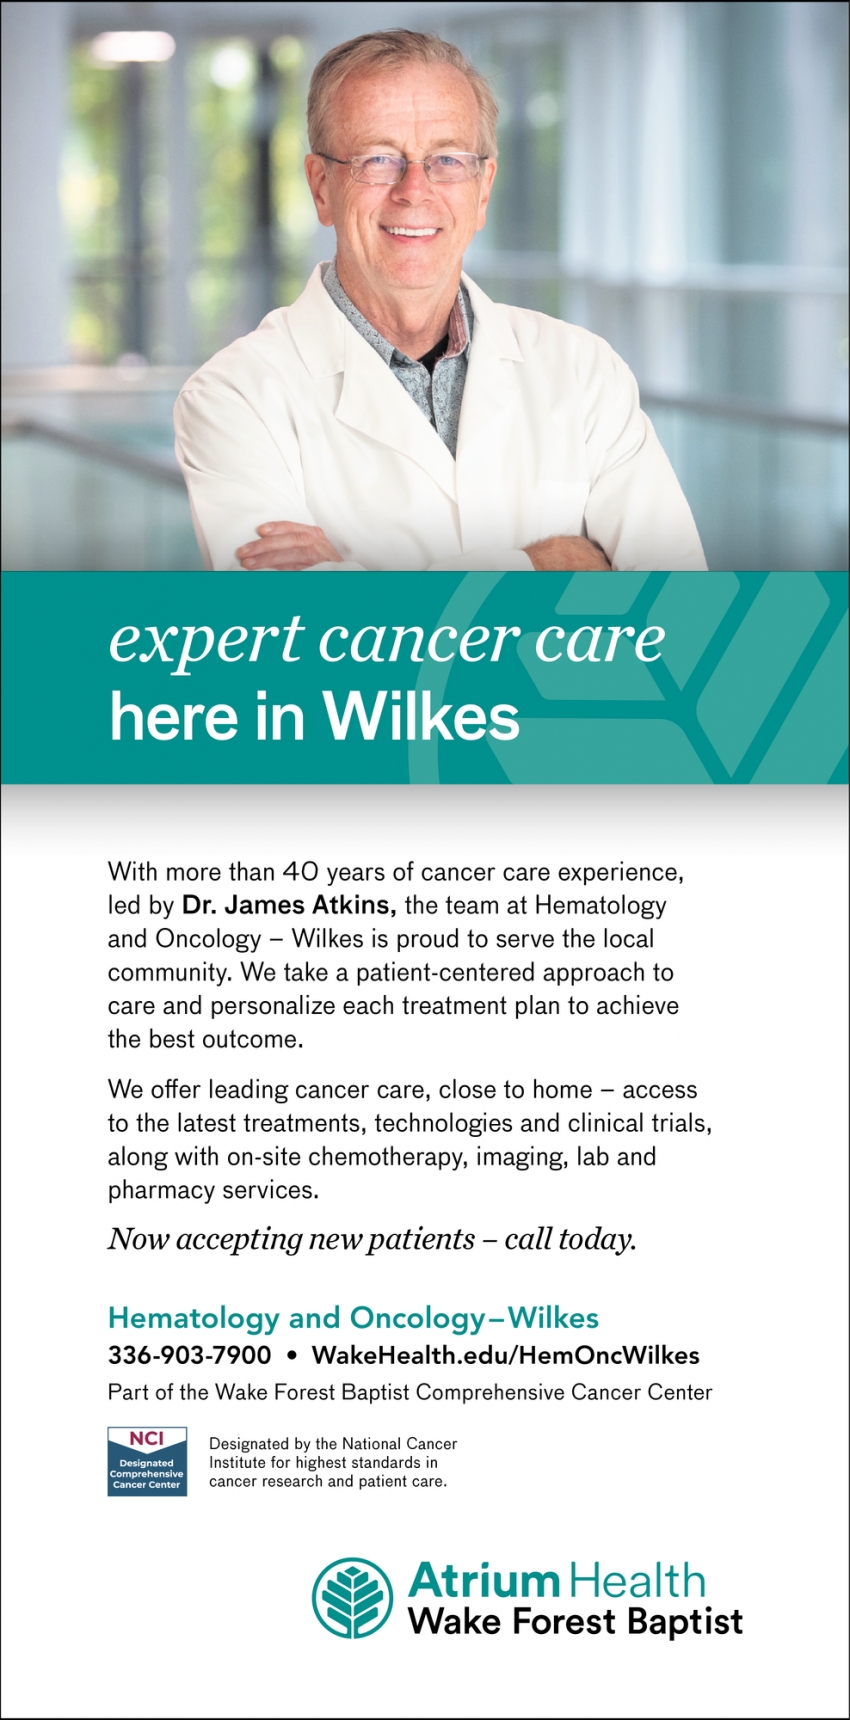 Expert Cancer Care Here in Wilkes